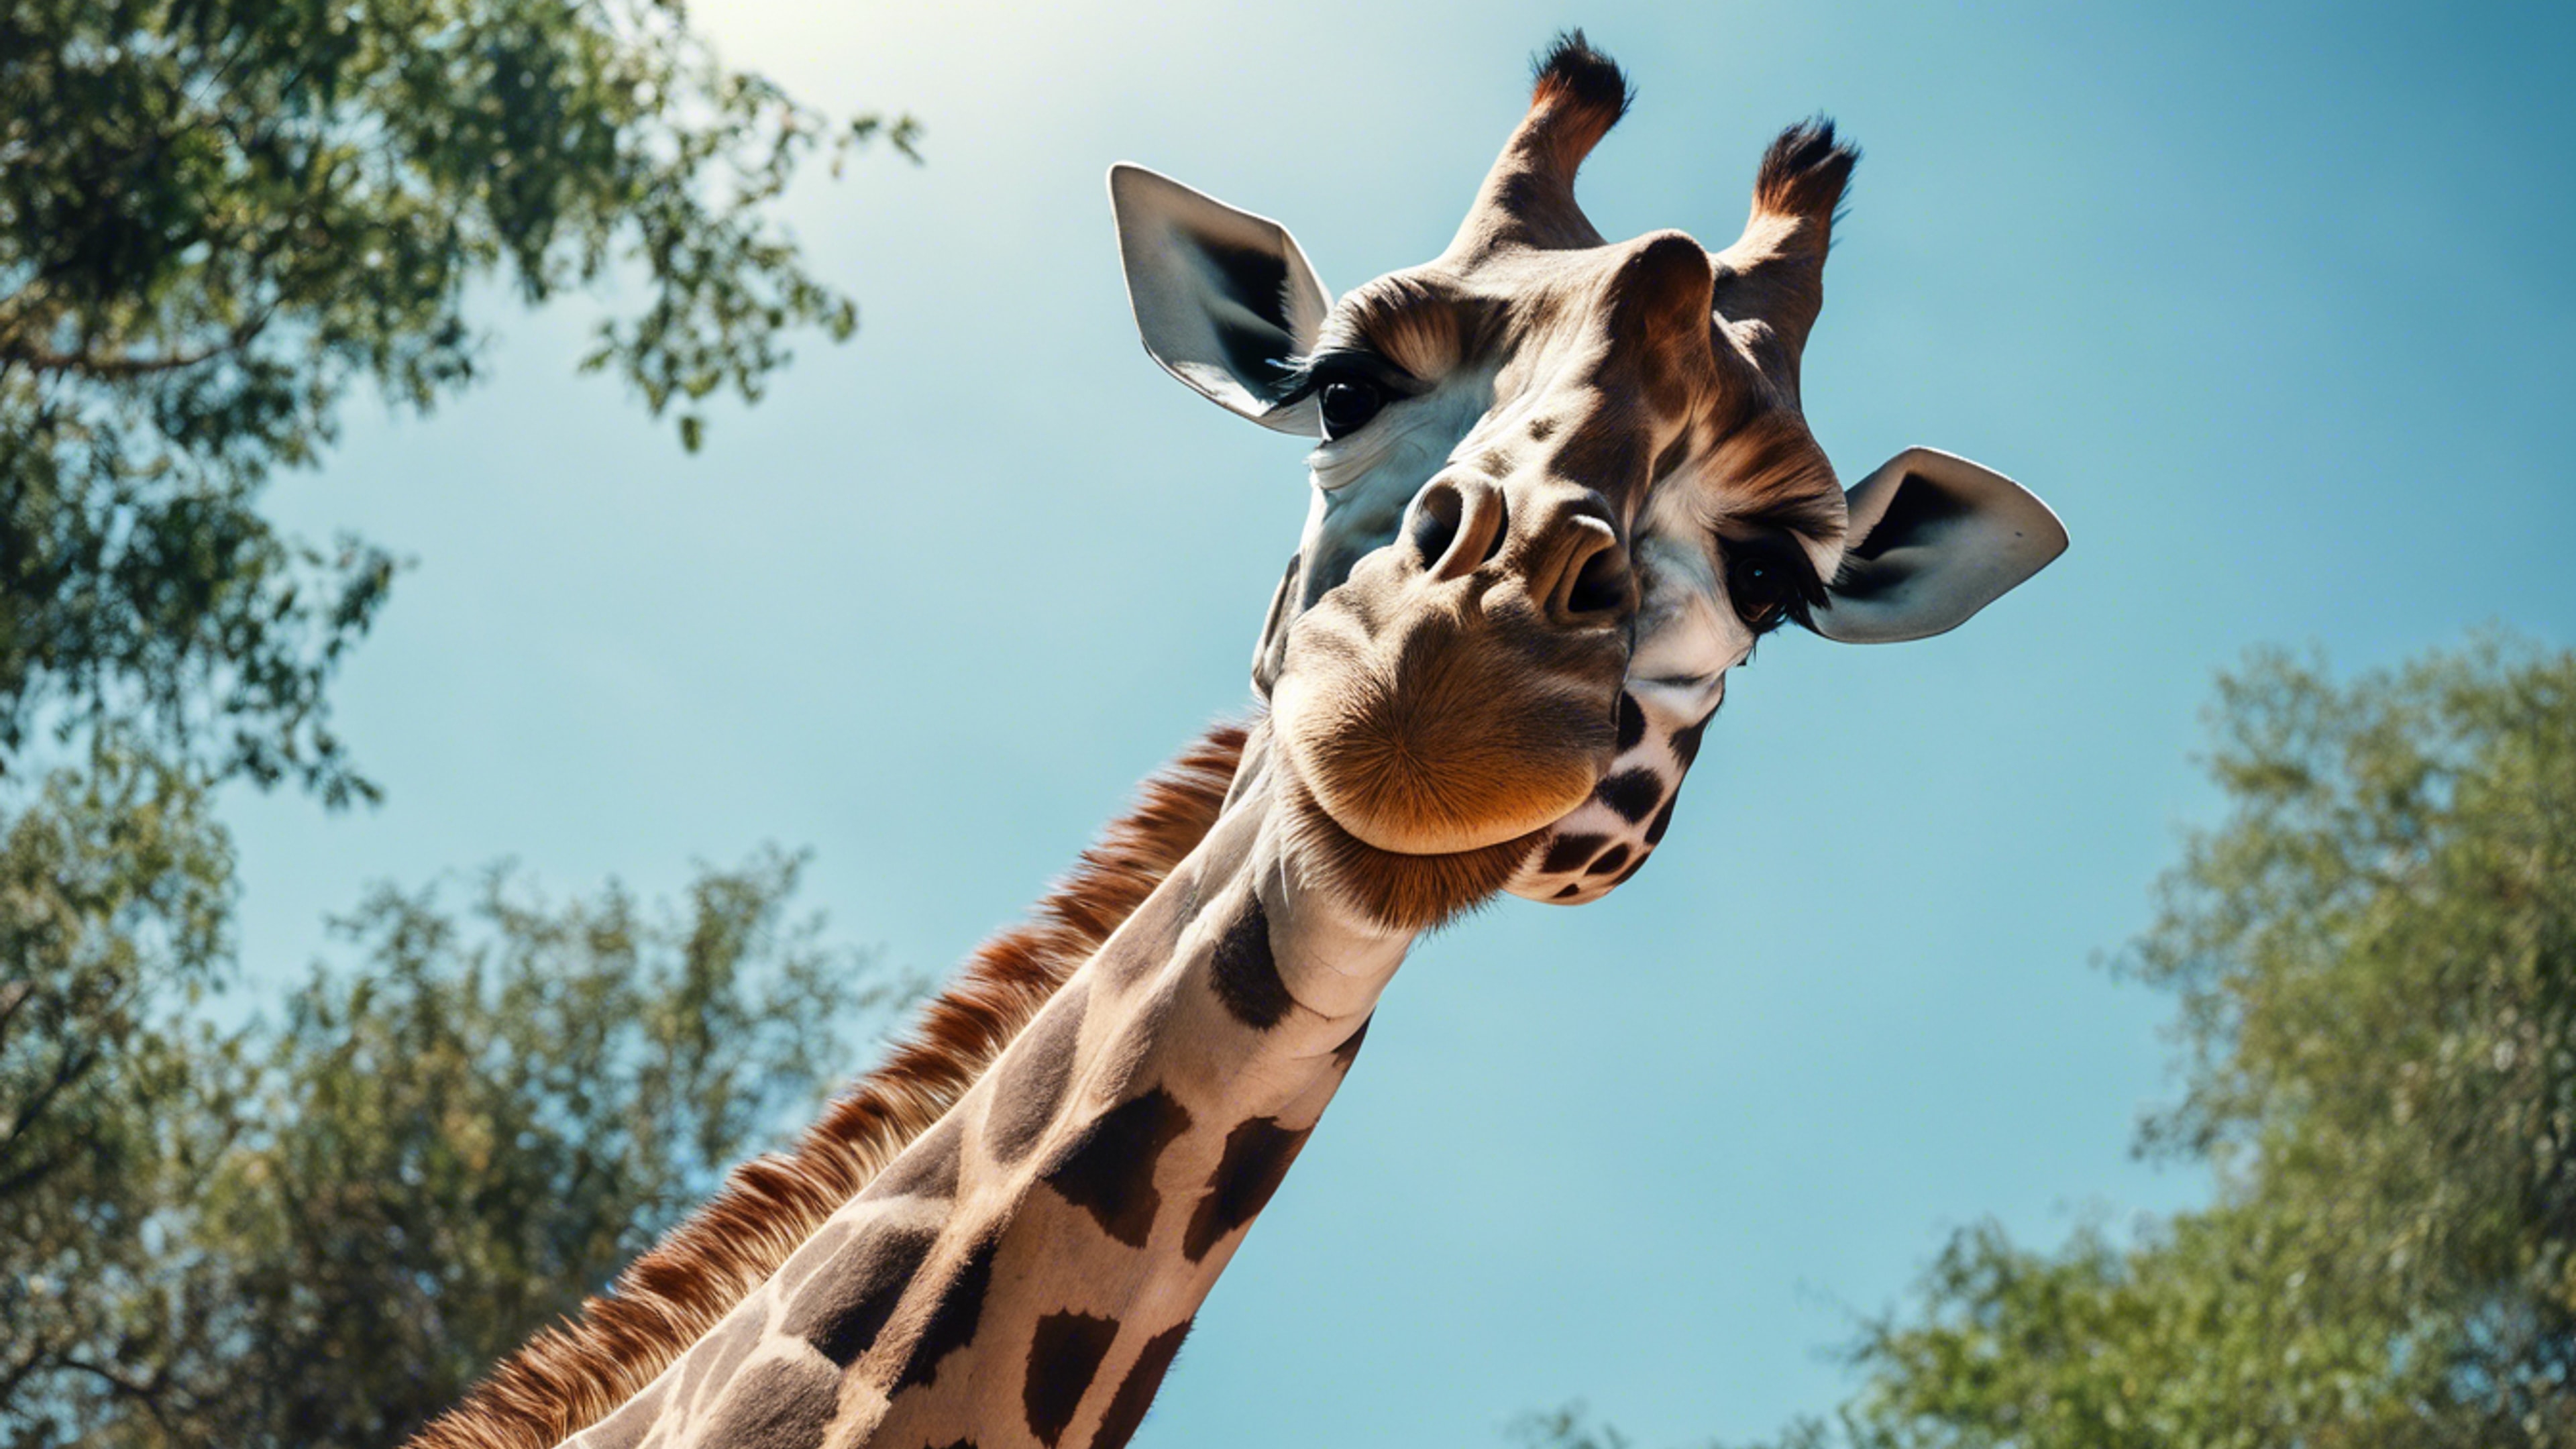 A picture from a below angle showing the towering magnificence of a giraffe against a clear blue sky.壁紙[8a88956d9aa2483bb204]